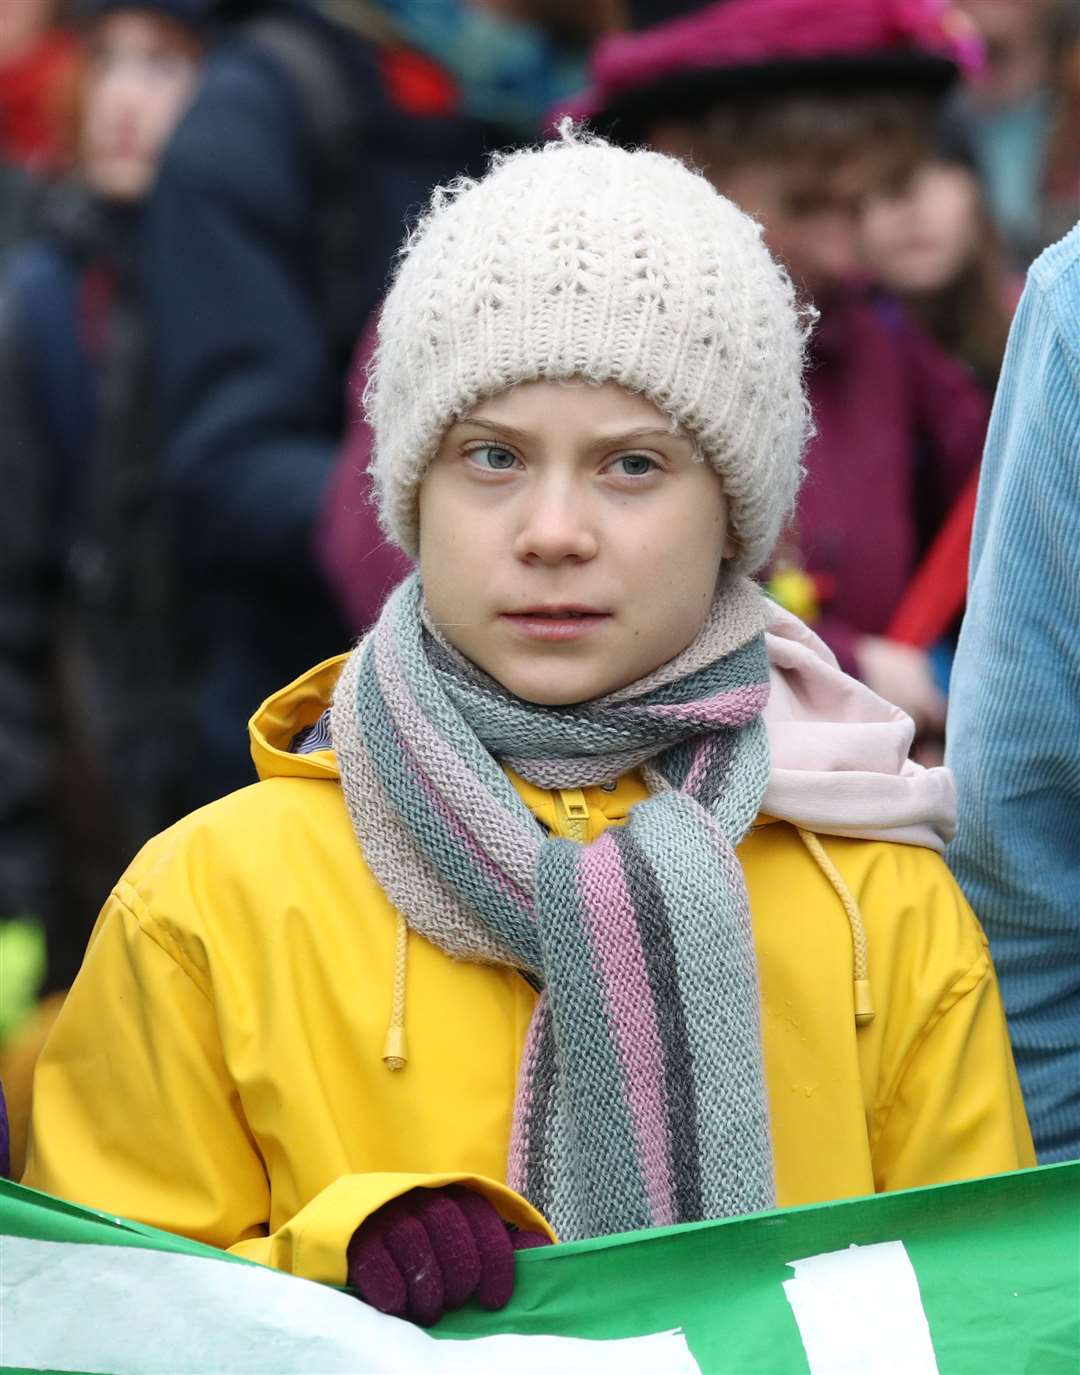 The special update to the Oxford English Dictionary includes the term ‘climate strike’, in recognition of the youth protests led by Greta Thunberg (Andrew Matthews/PA)